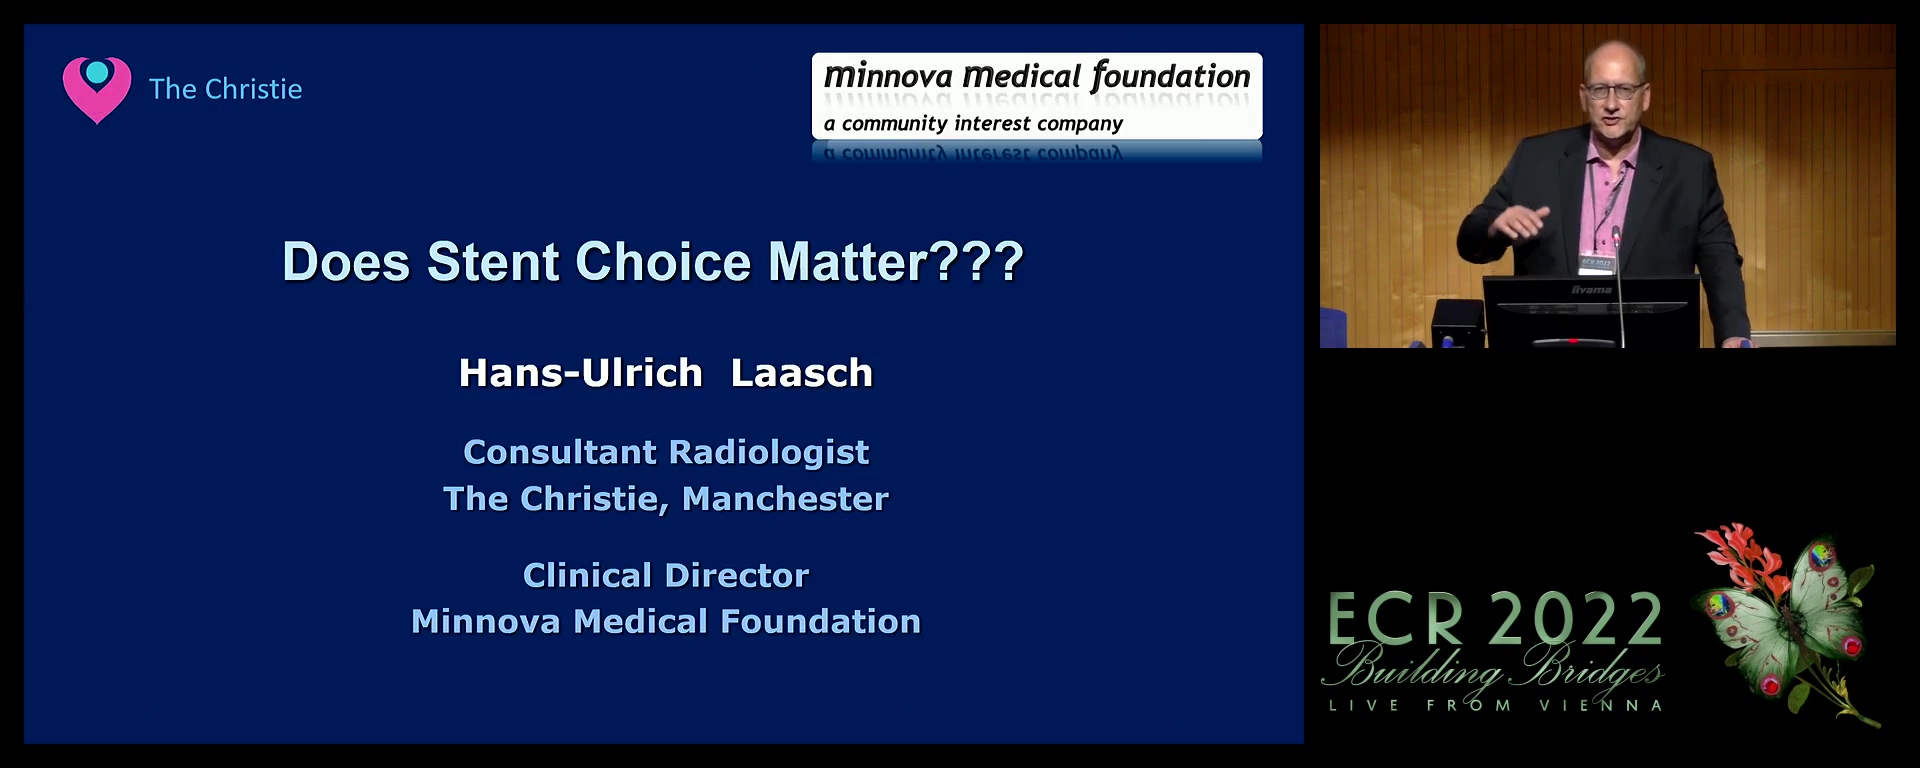 Does stent choice matter?